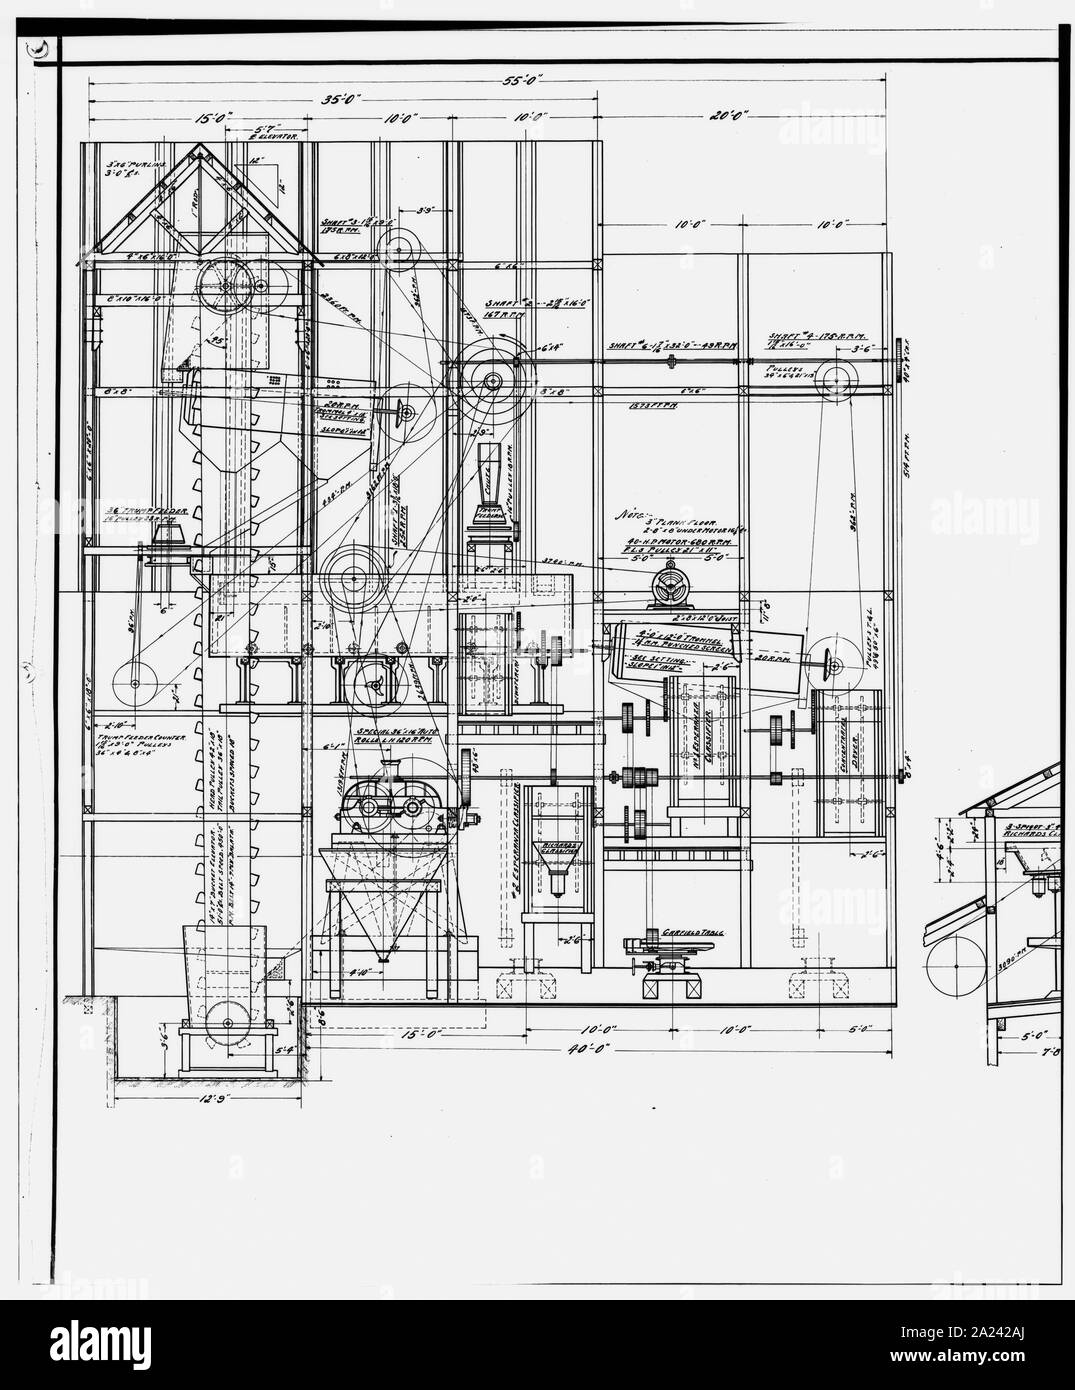 PHOTOCOPY OF DRAWING, CONCENTRATOR, GENERAL, JIG SECTION - Kennecott Copper Corporation, On Copper River and Northwestern Railroad, Kennicott, Valdez-Cordova Census Area, AK; Stock Photo